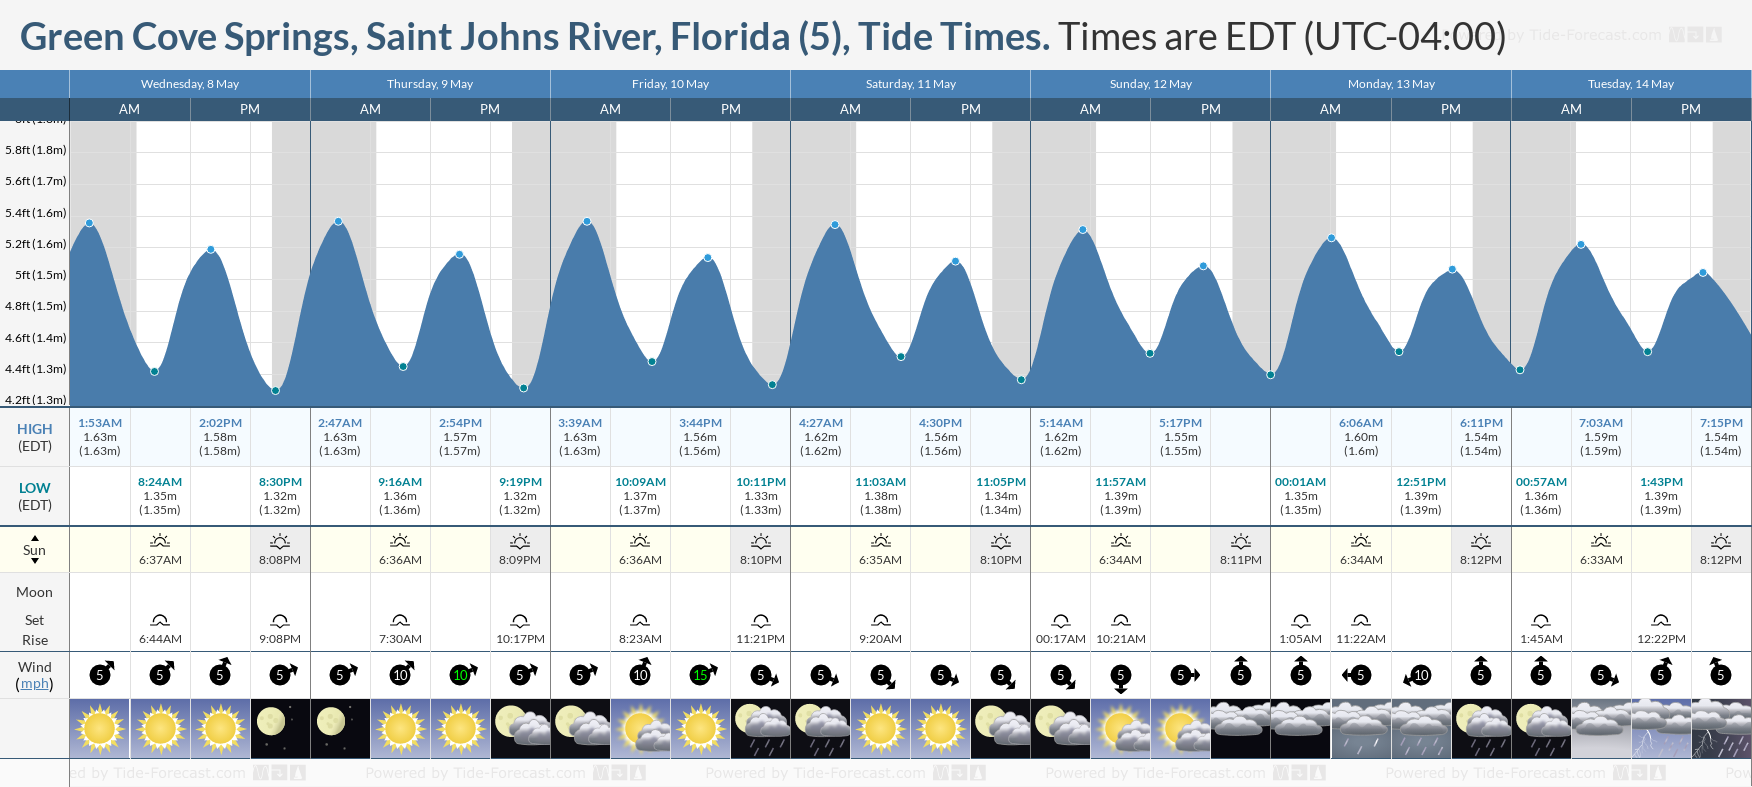 Green Cove Springs, Saint Johns River, Florida (5) Tide Chart including high and low tide times for the next 7 days